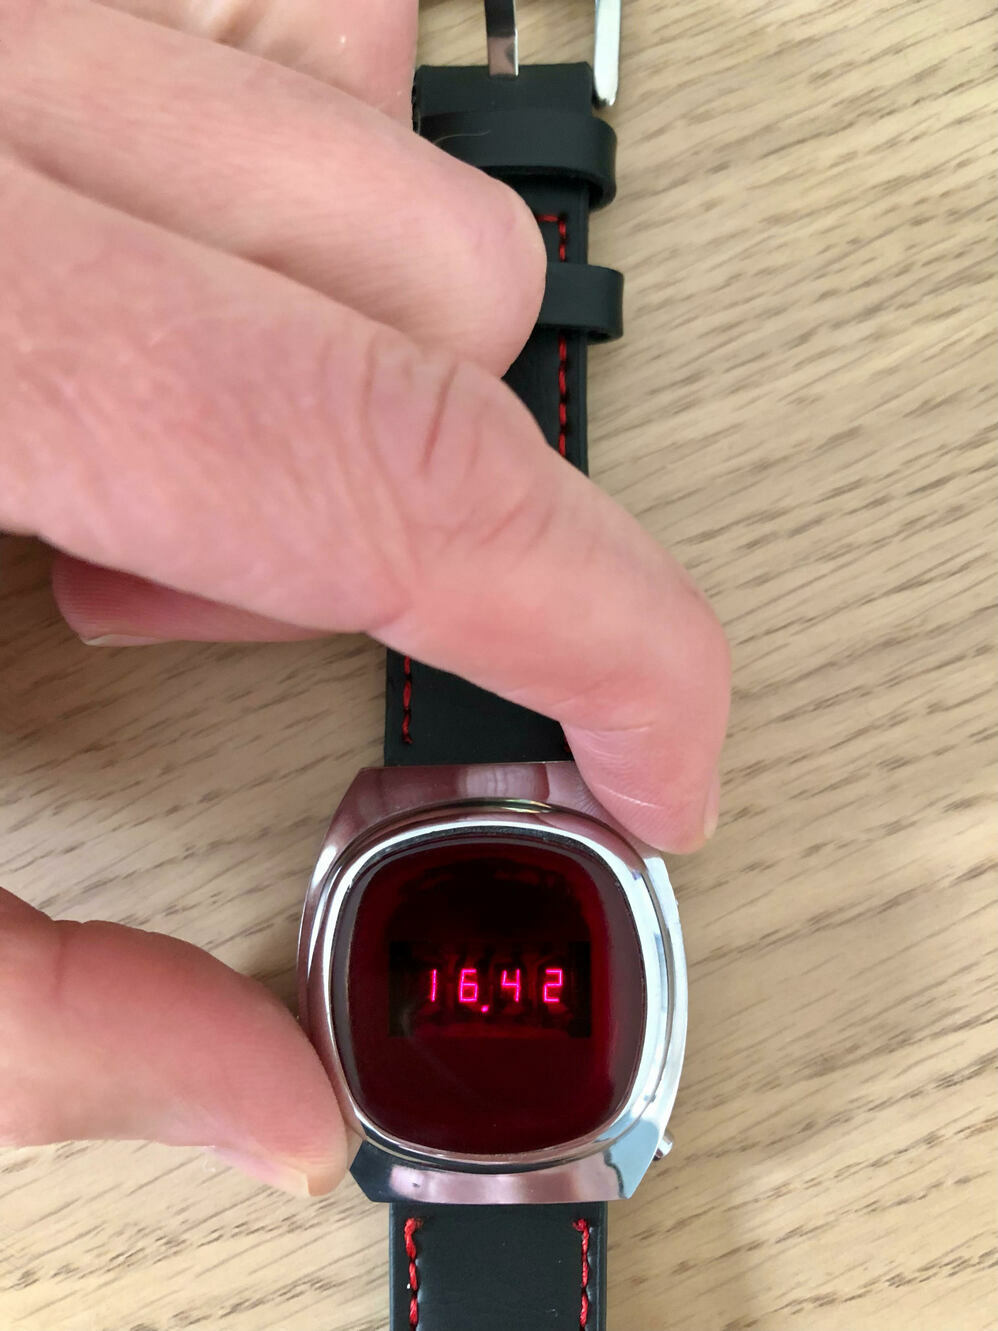 Modern, Frugal PCB Breathes New Life Into Soviet-Made LED Watch | Hackaday